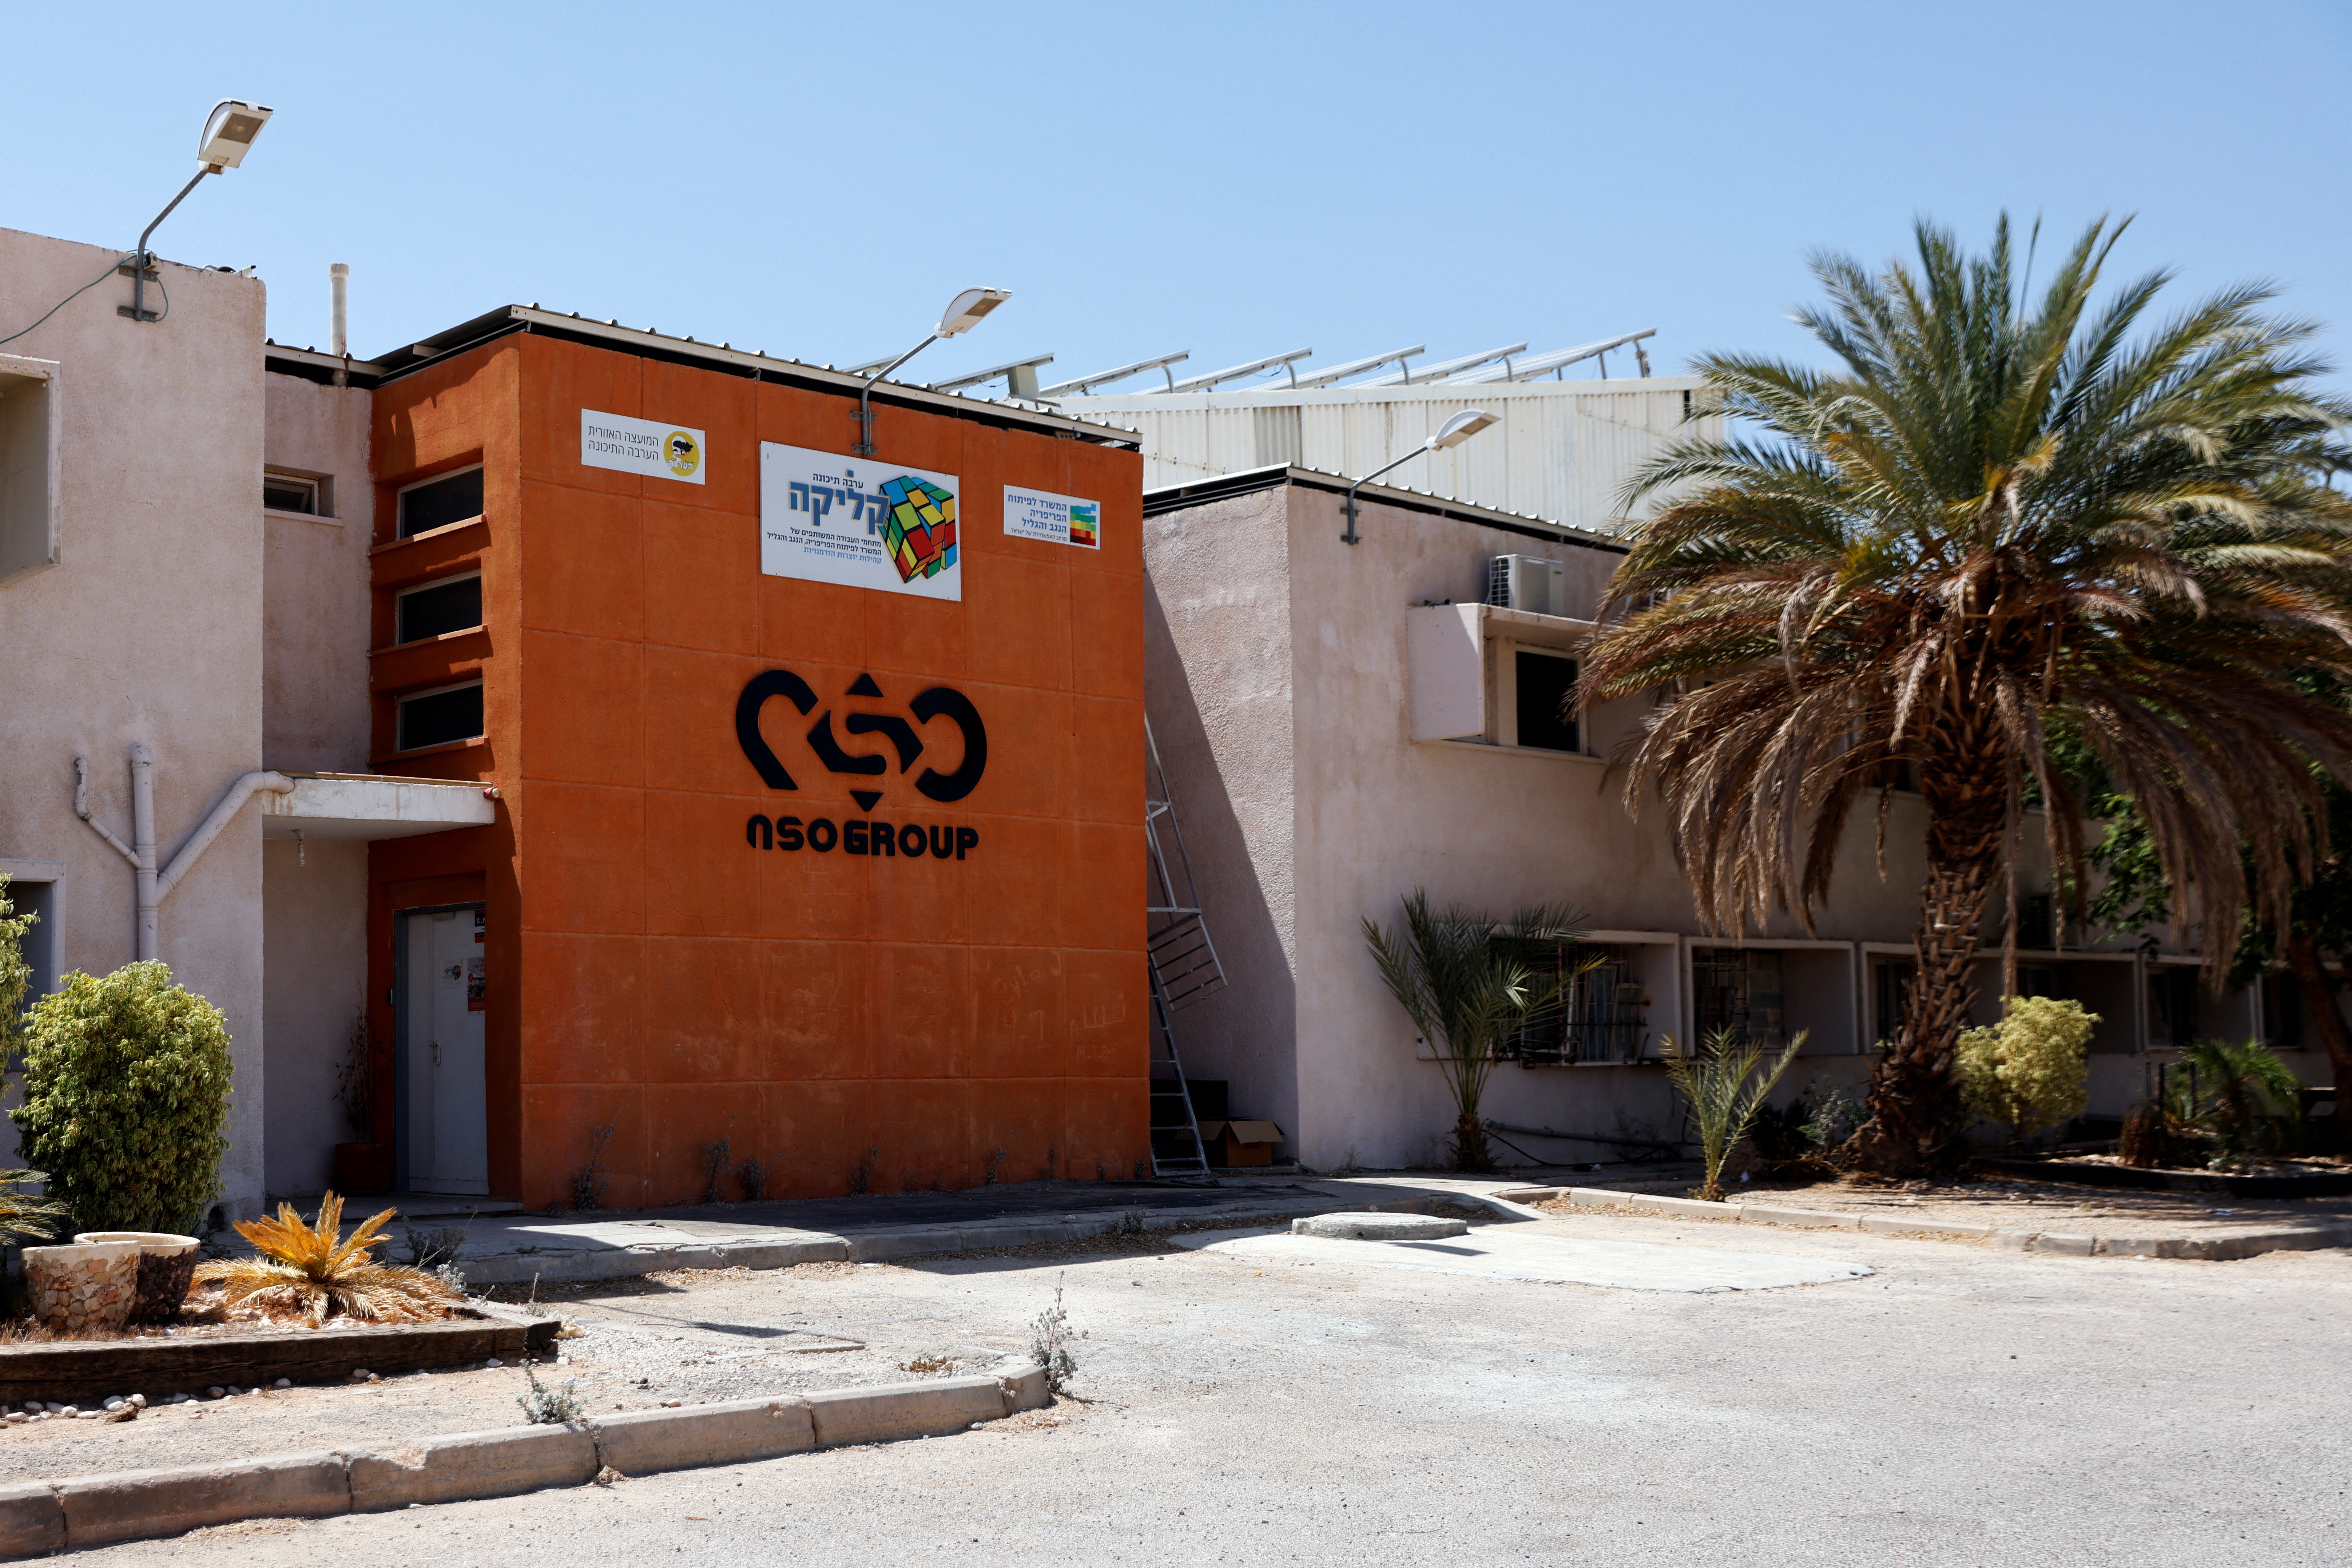 The logo of Israeli cyber firm NSO Group is seen at one of its branches in the Arava Desert, southern Israel